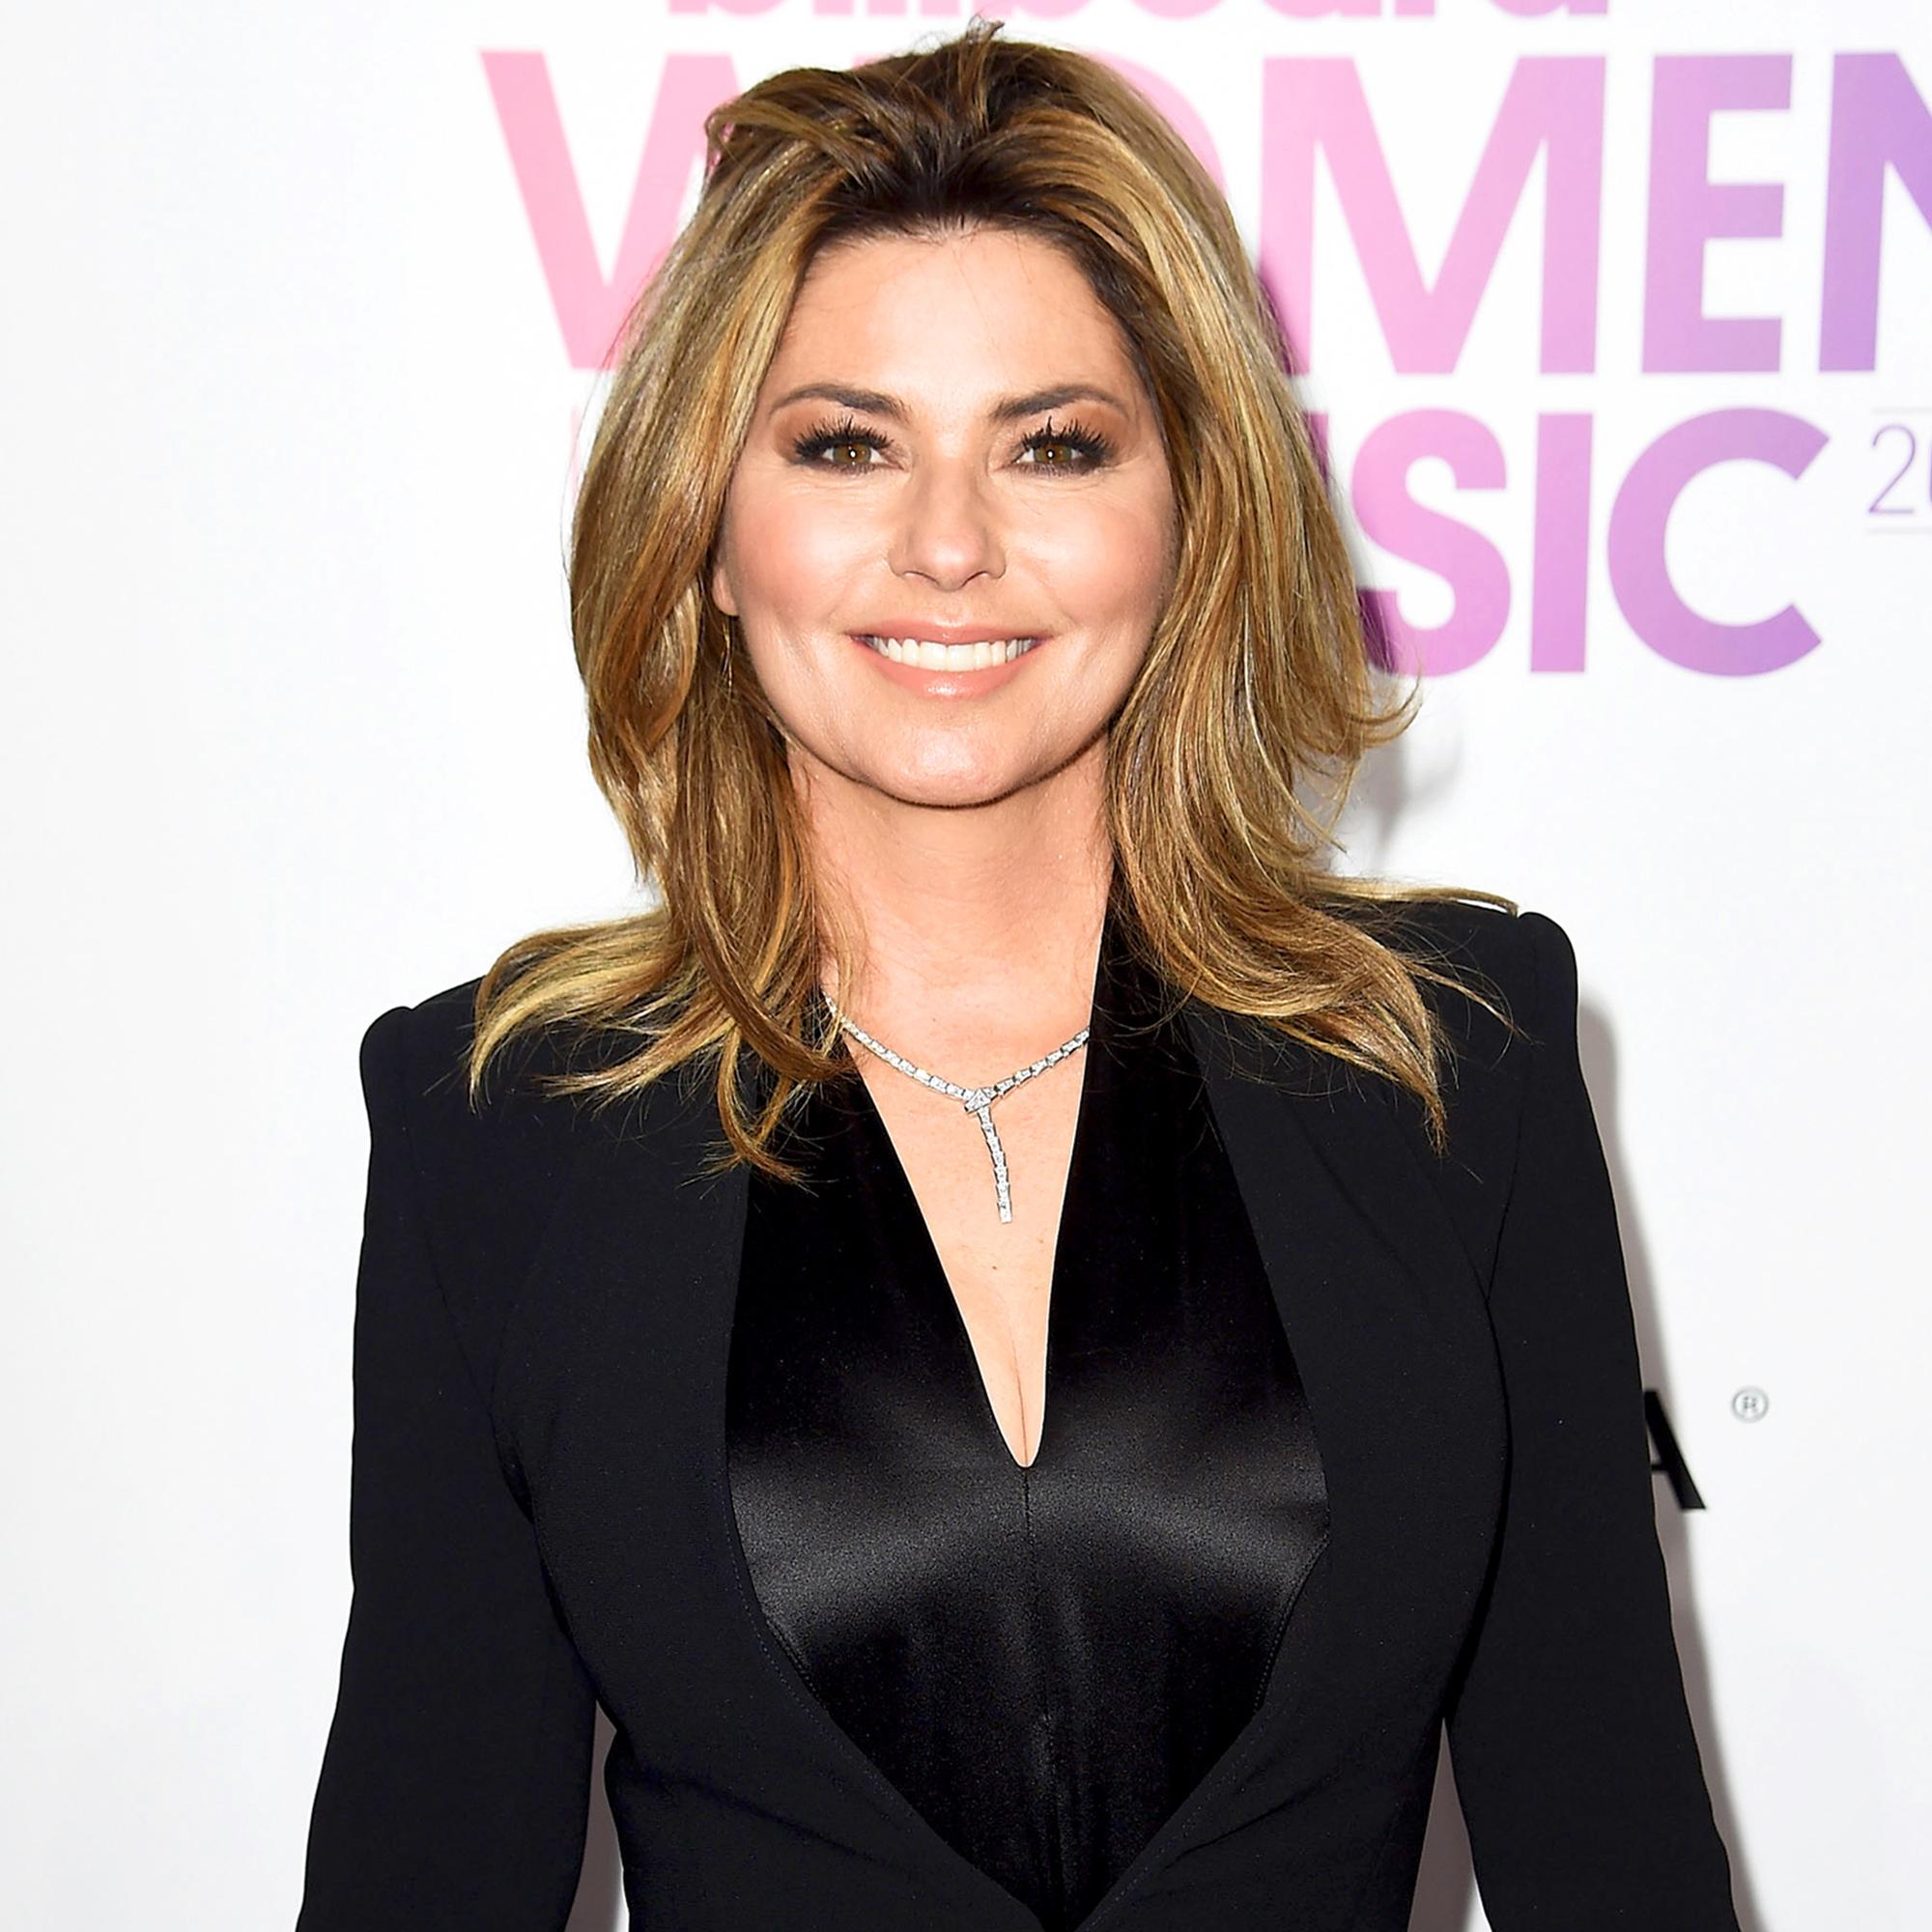 49 Hottest Shania Twain Bikini Pictures Will Drive You Nuts For Her | Best Of Comic Books